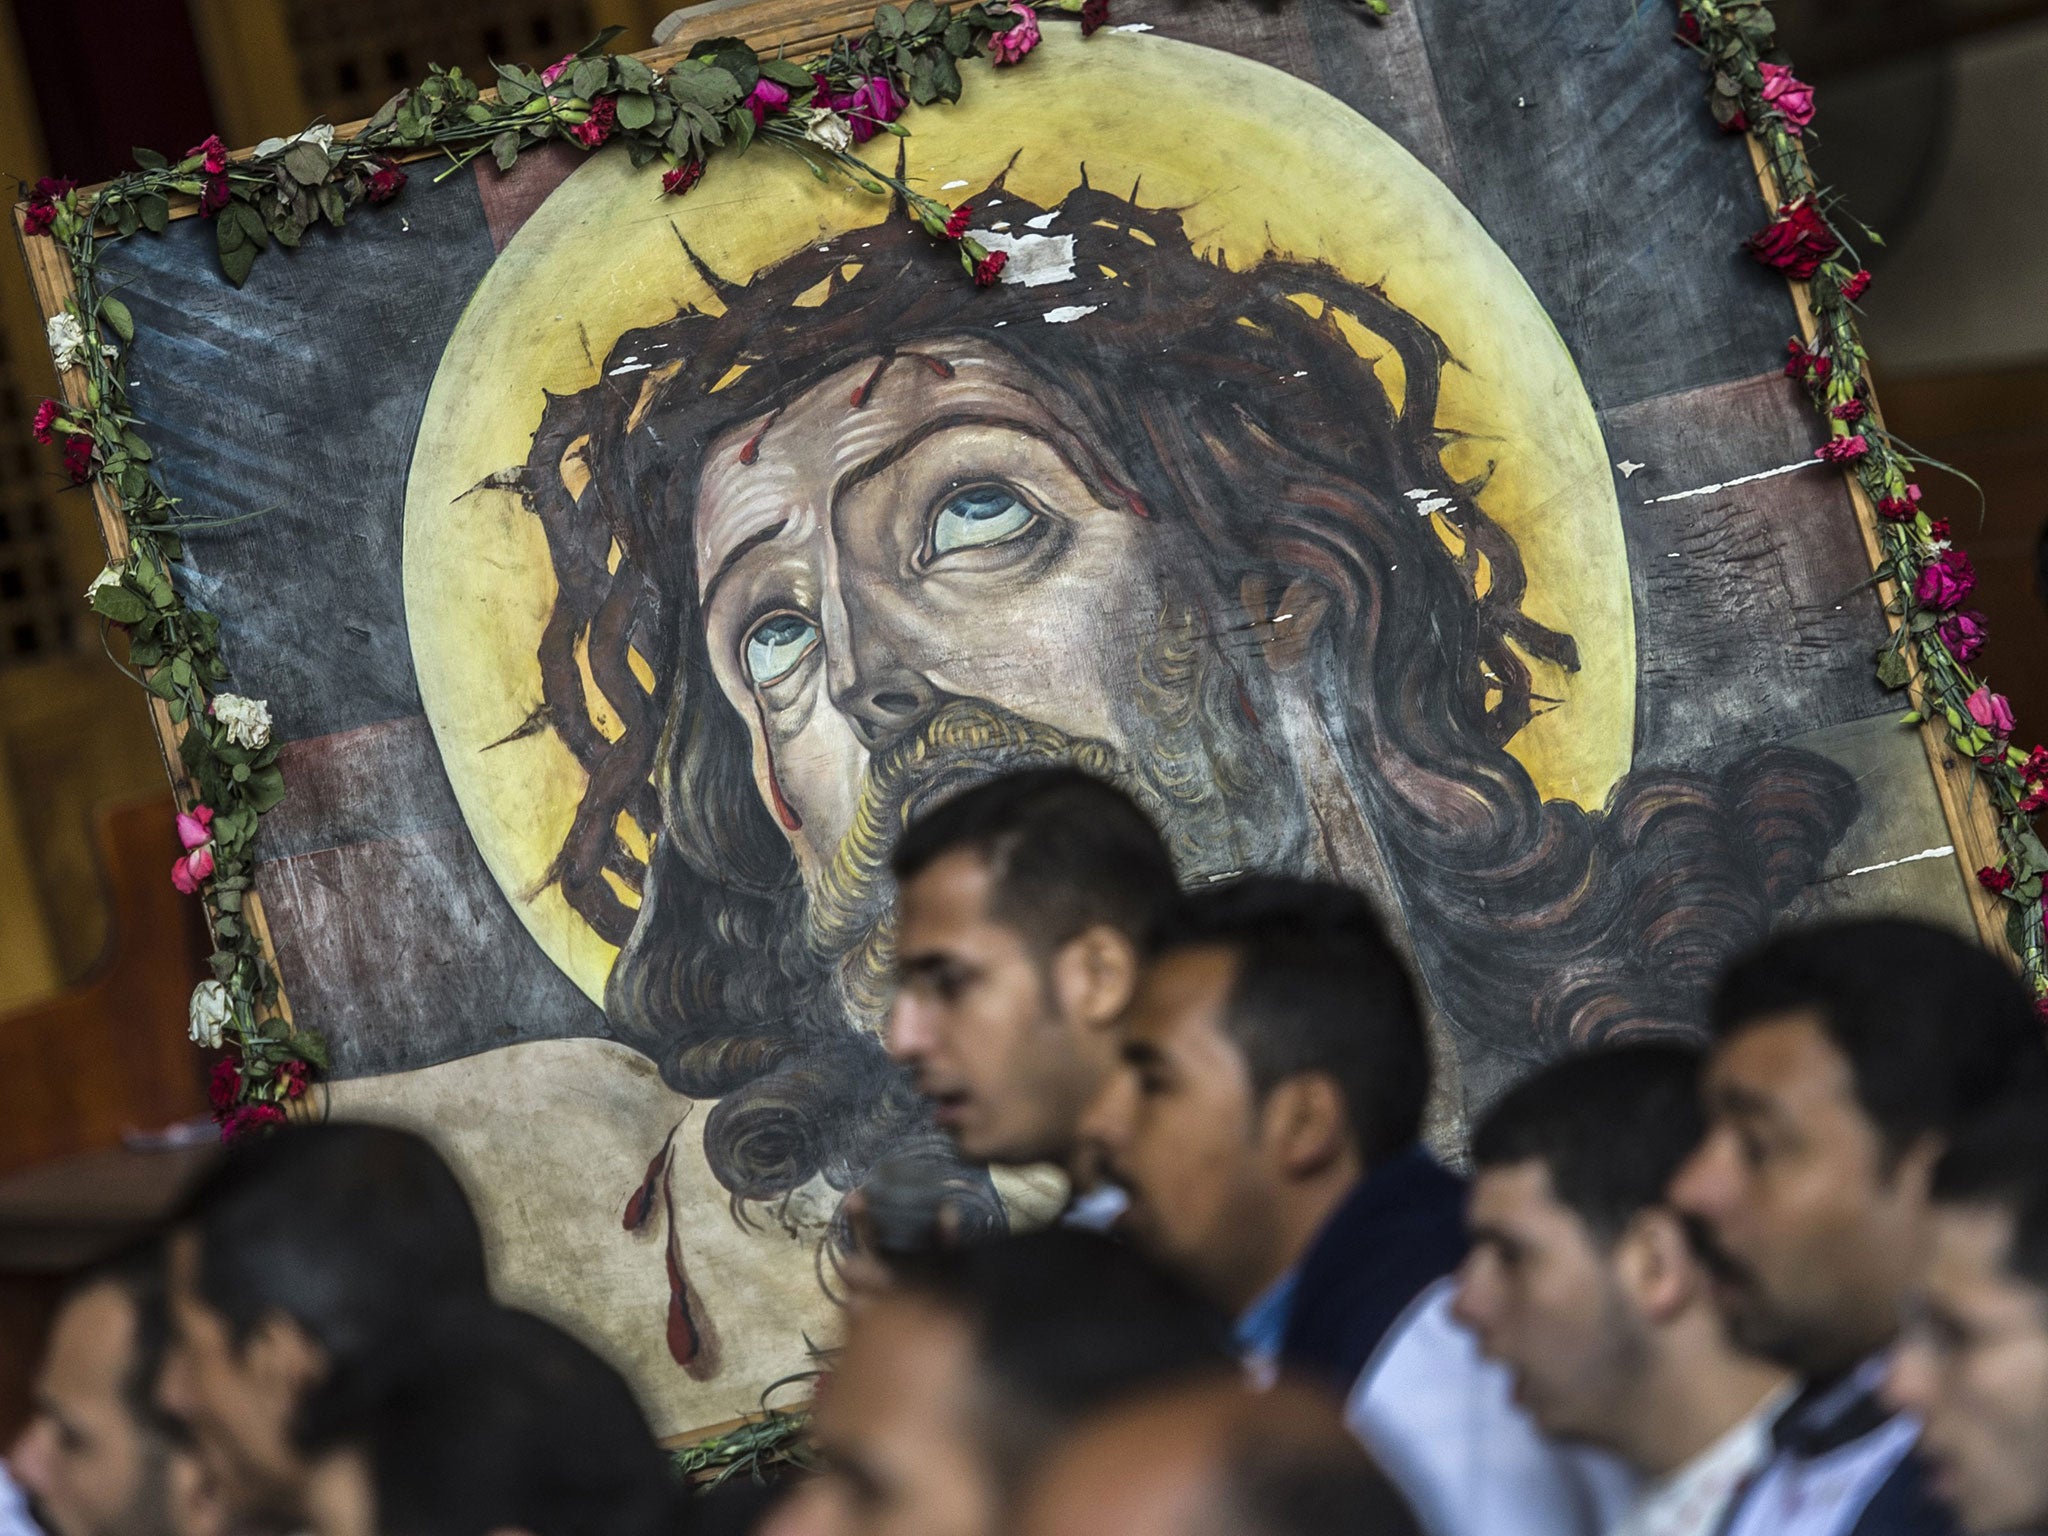 Christians make up approximately ten per cent of Egypt's population